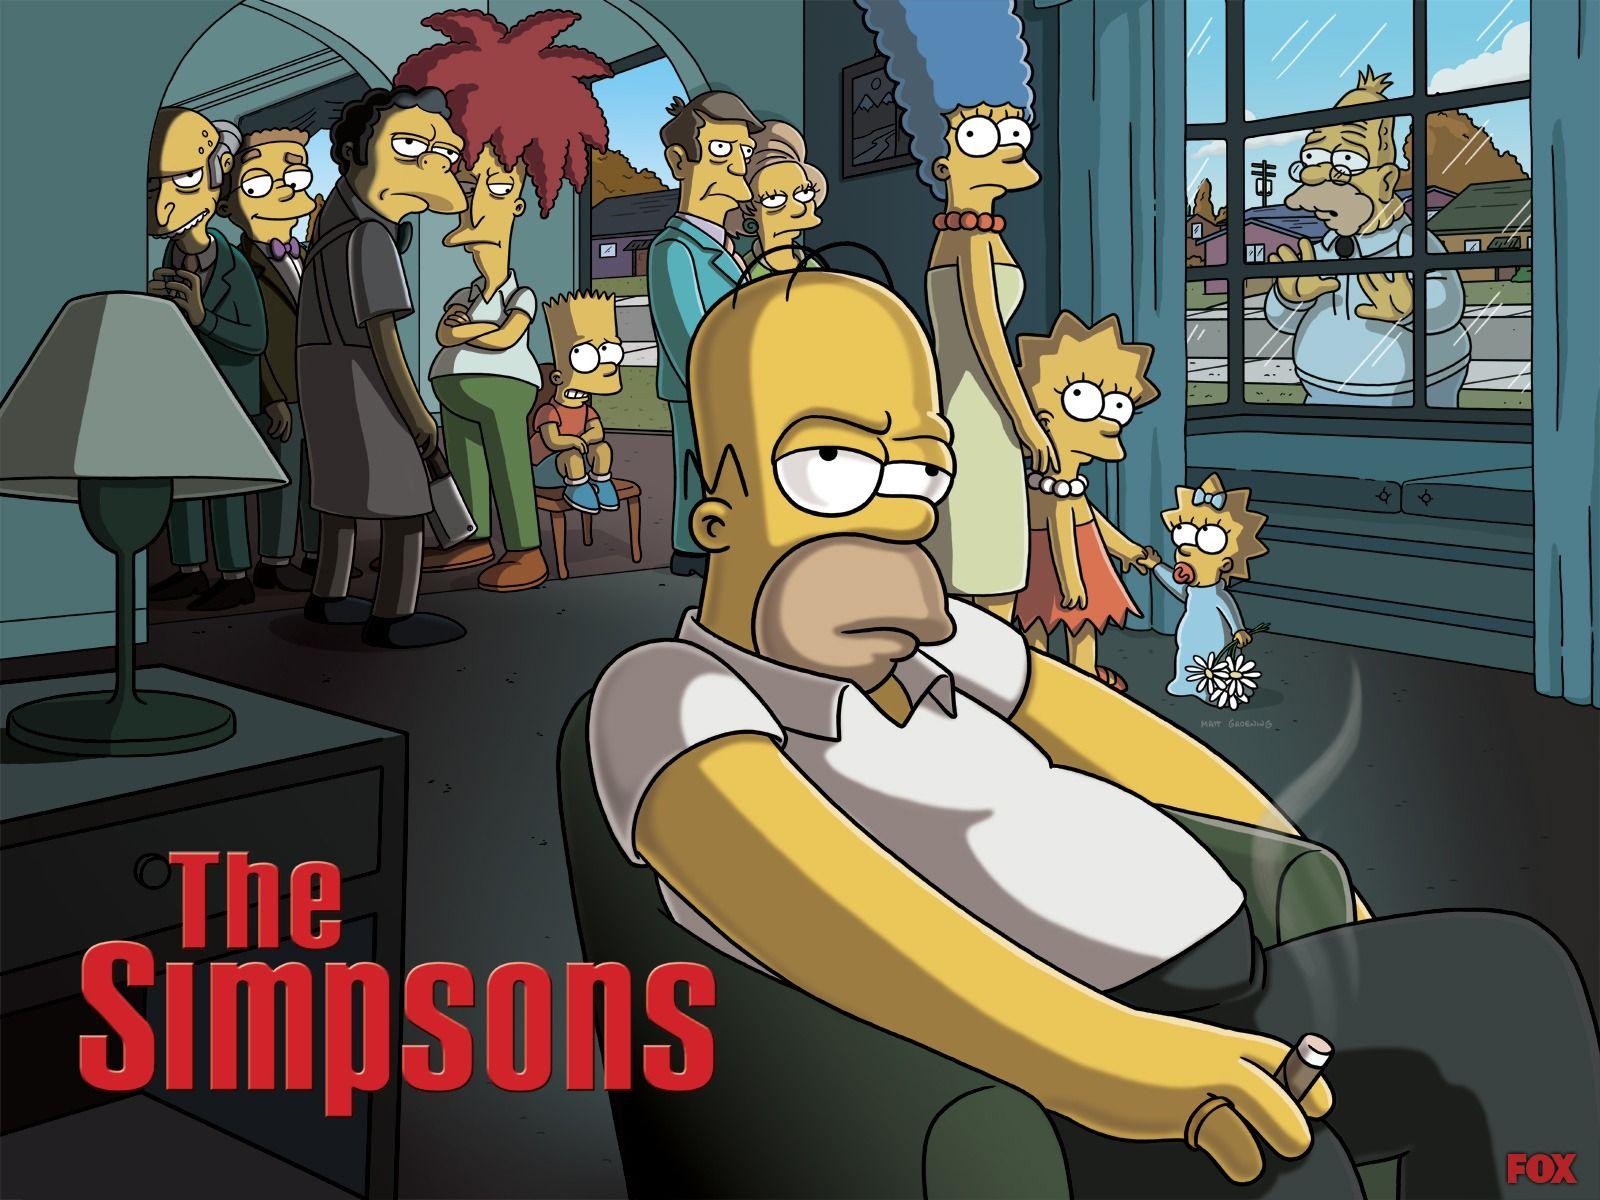 The Simpsons wallpaper 33. The simpsons, Homer simpson